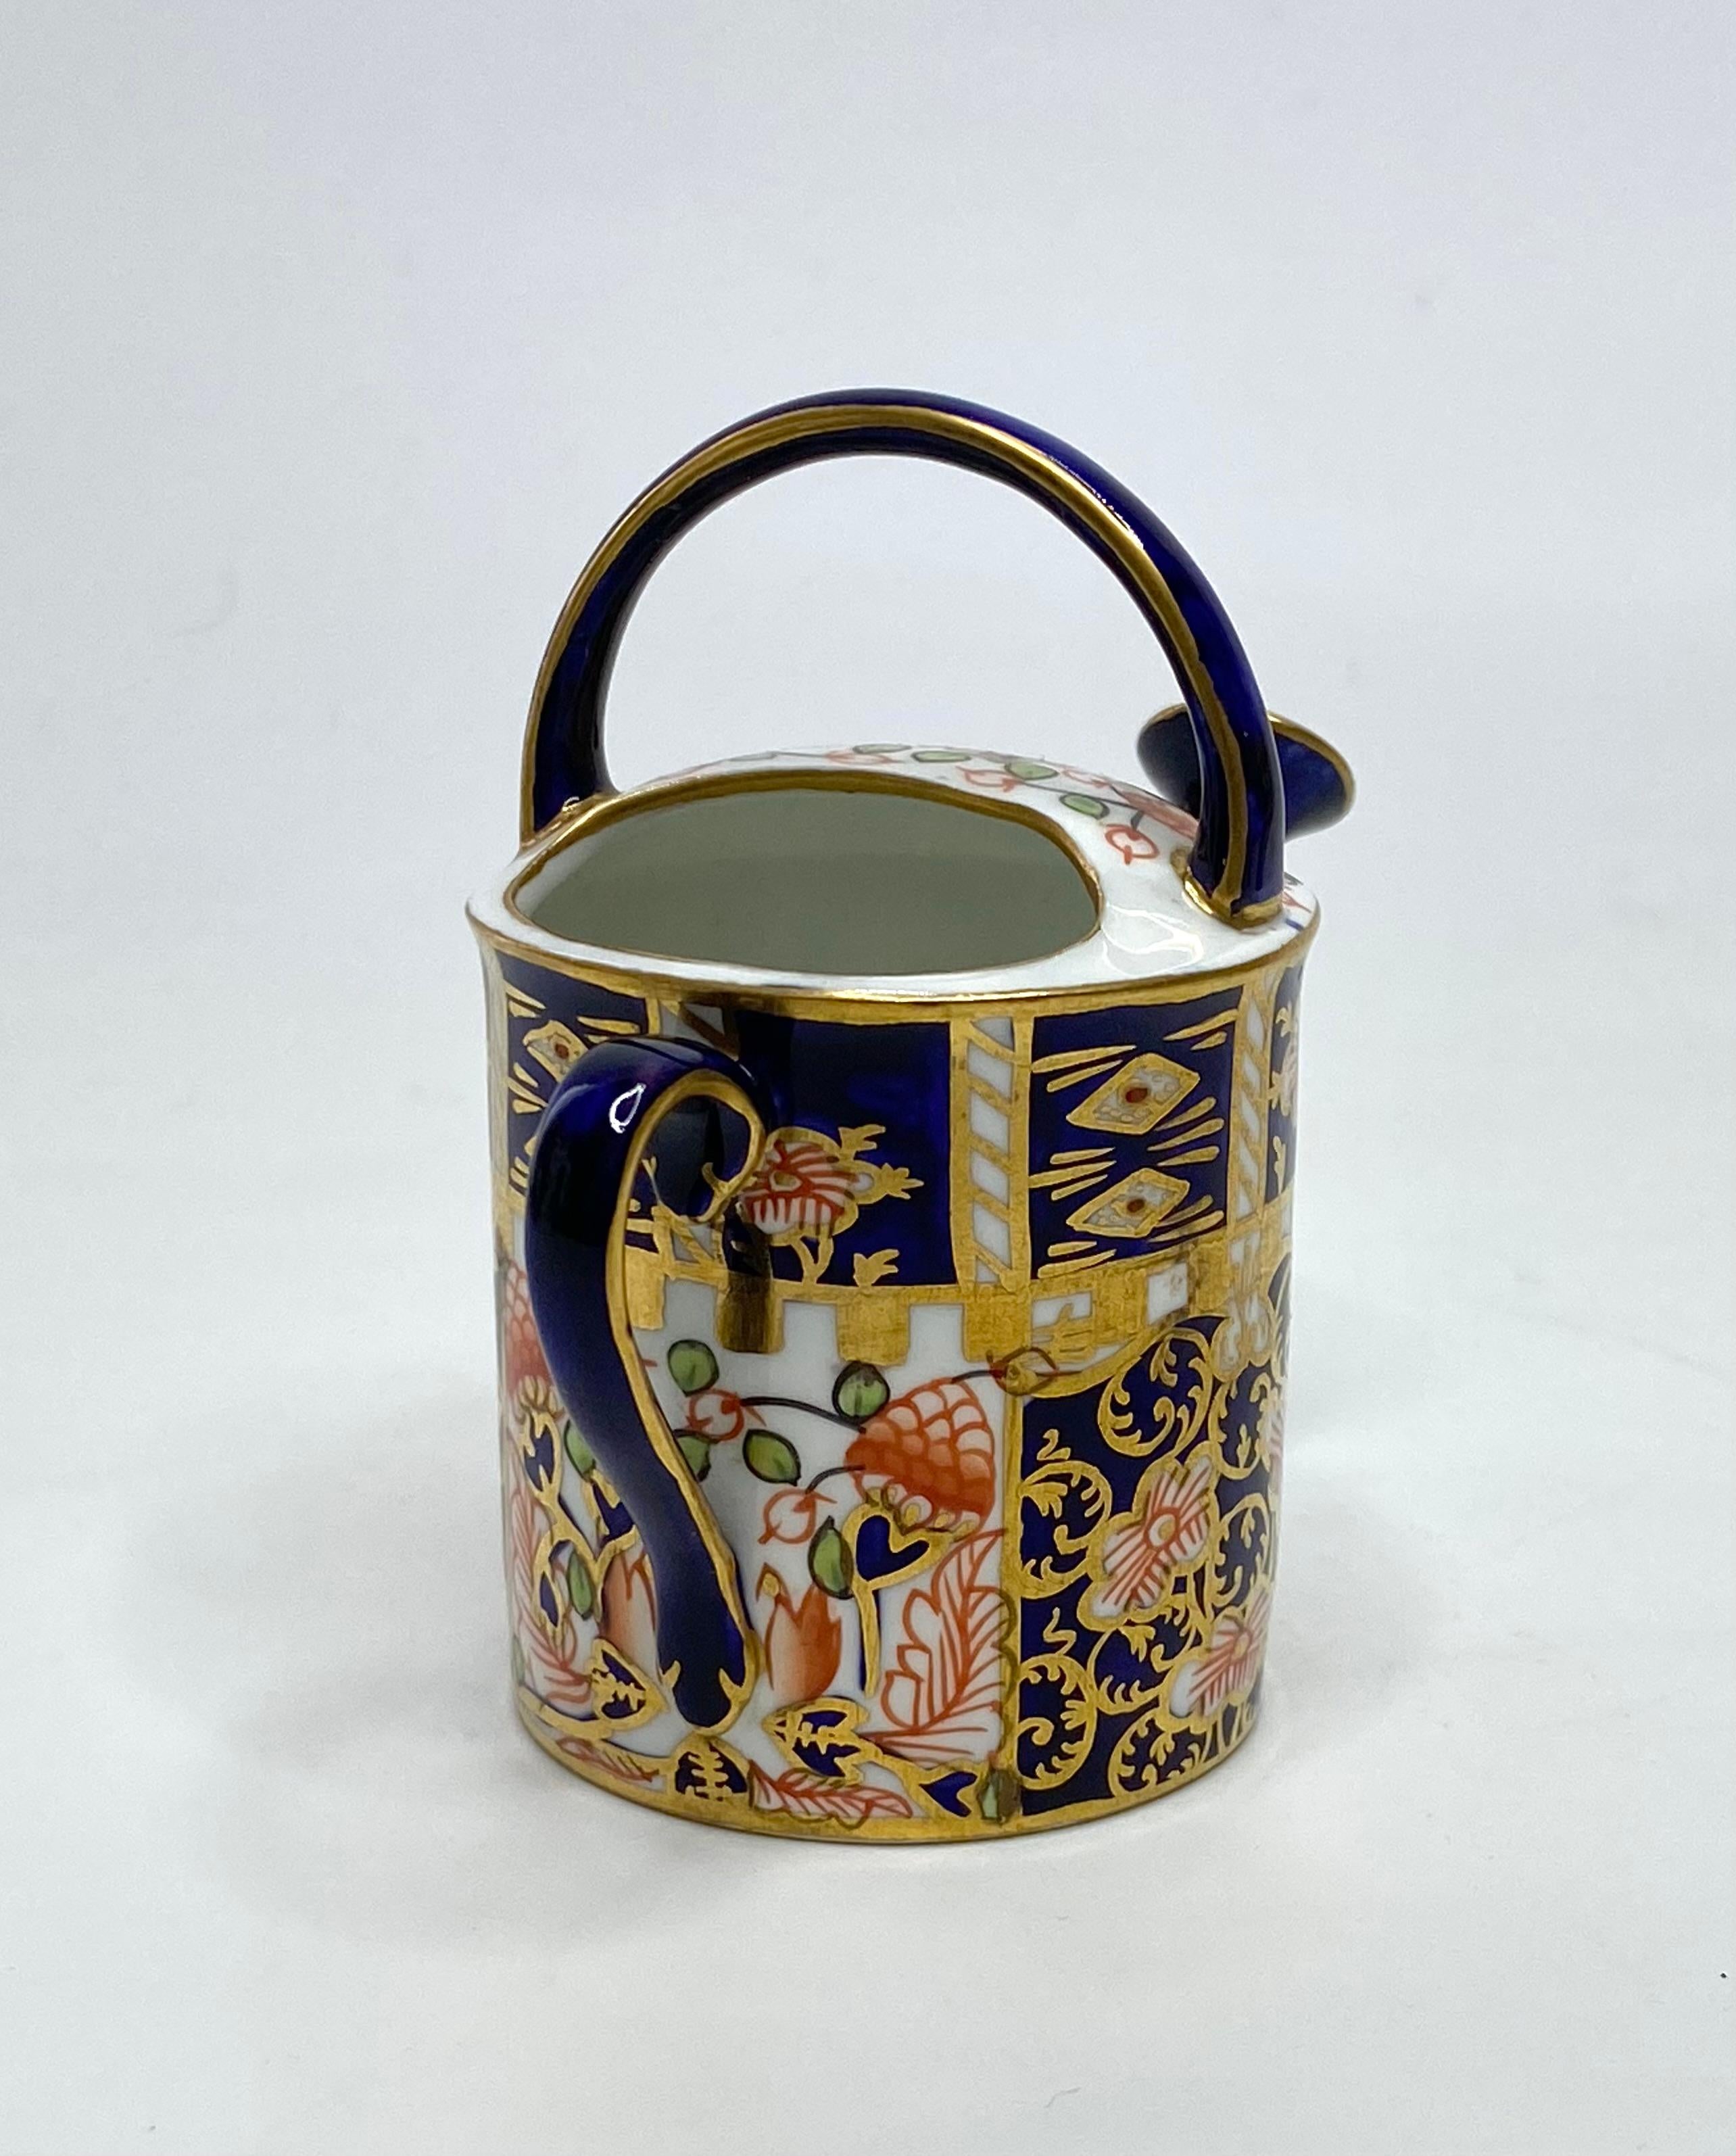 Fired Royal Crown Derby miniature watering can, d. 1922.